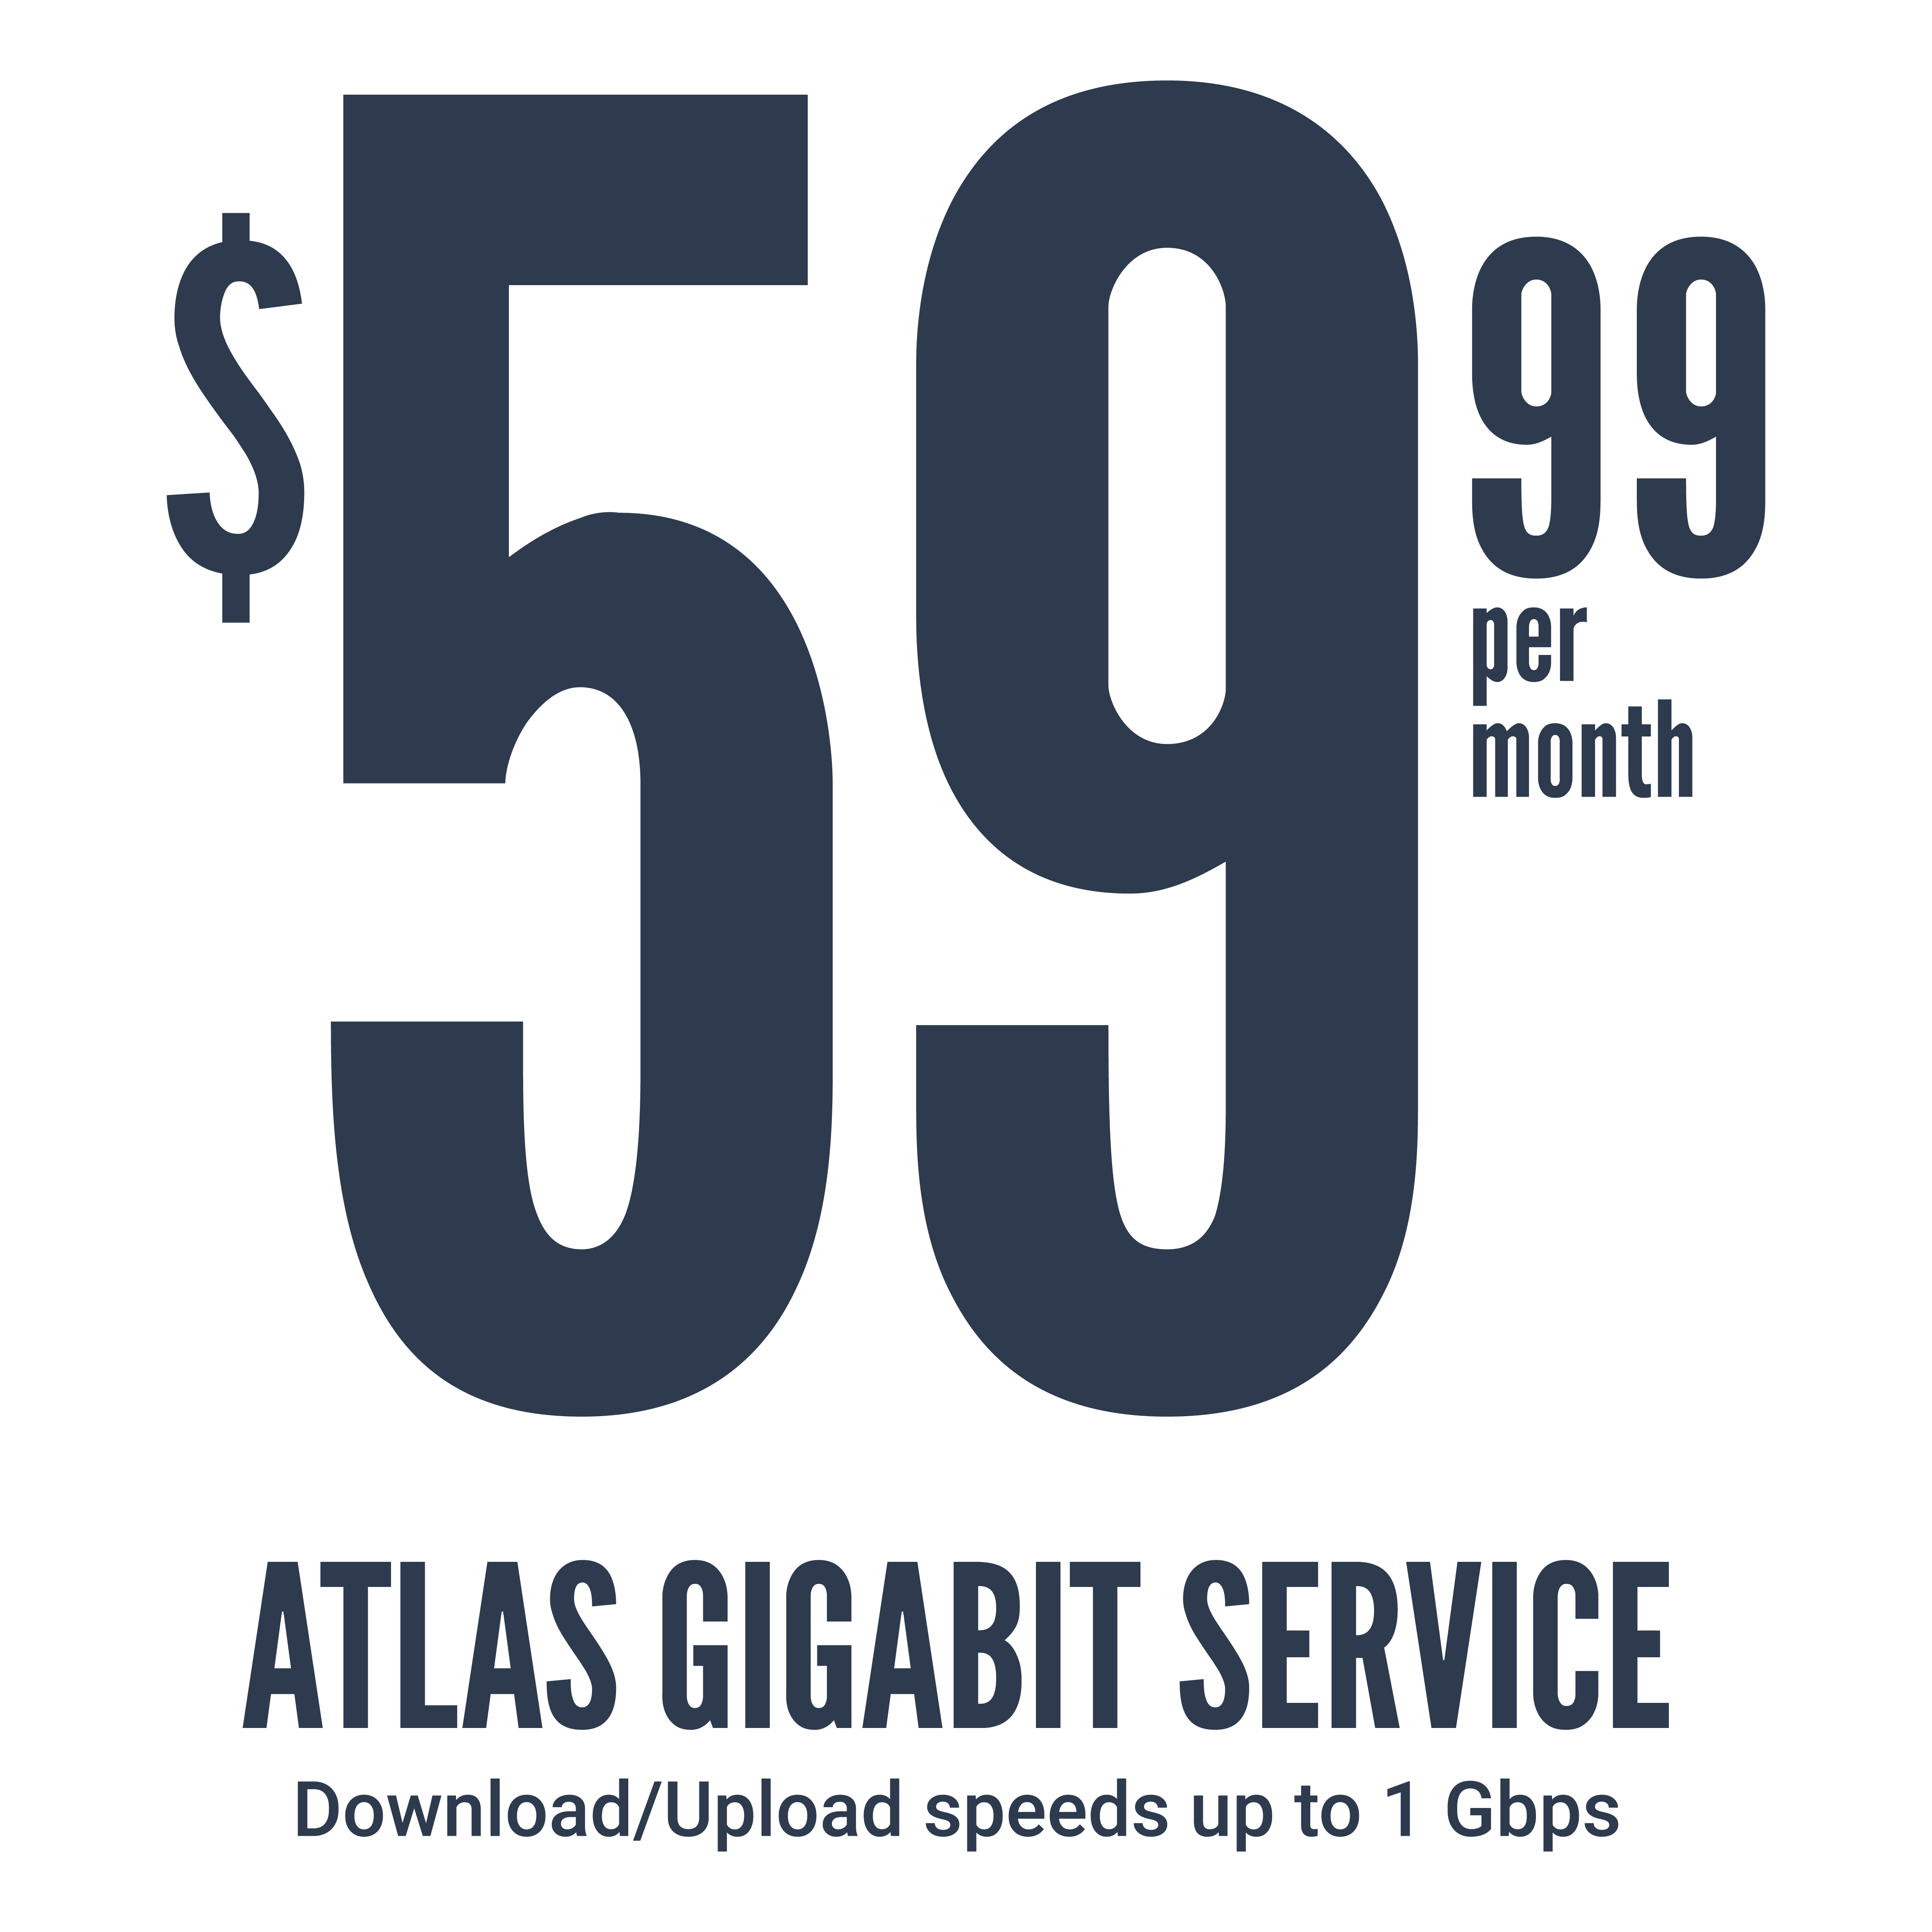 Large image of Atlas Networks' prices for gigabit residential internet, $59.99 per month